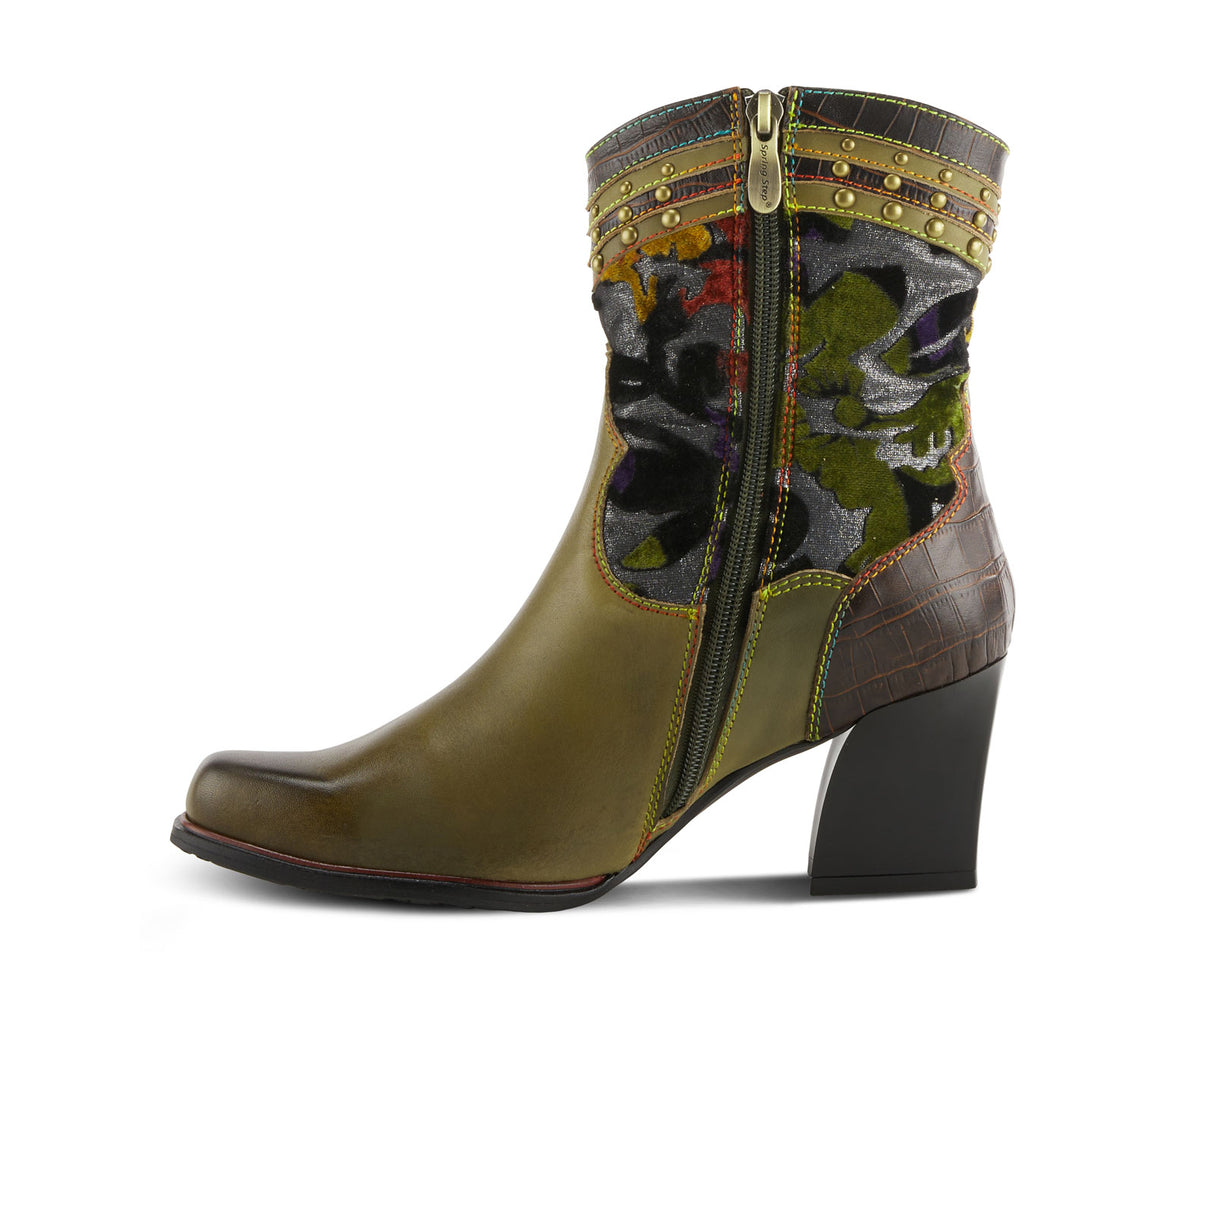 L'Artiste Happytime Ankle Boot (Women) - Olive Multi Boots - Fashion - Ankle Boot - The Heel Shoe Fitters